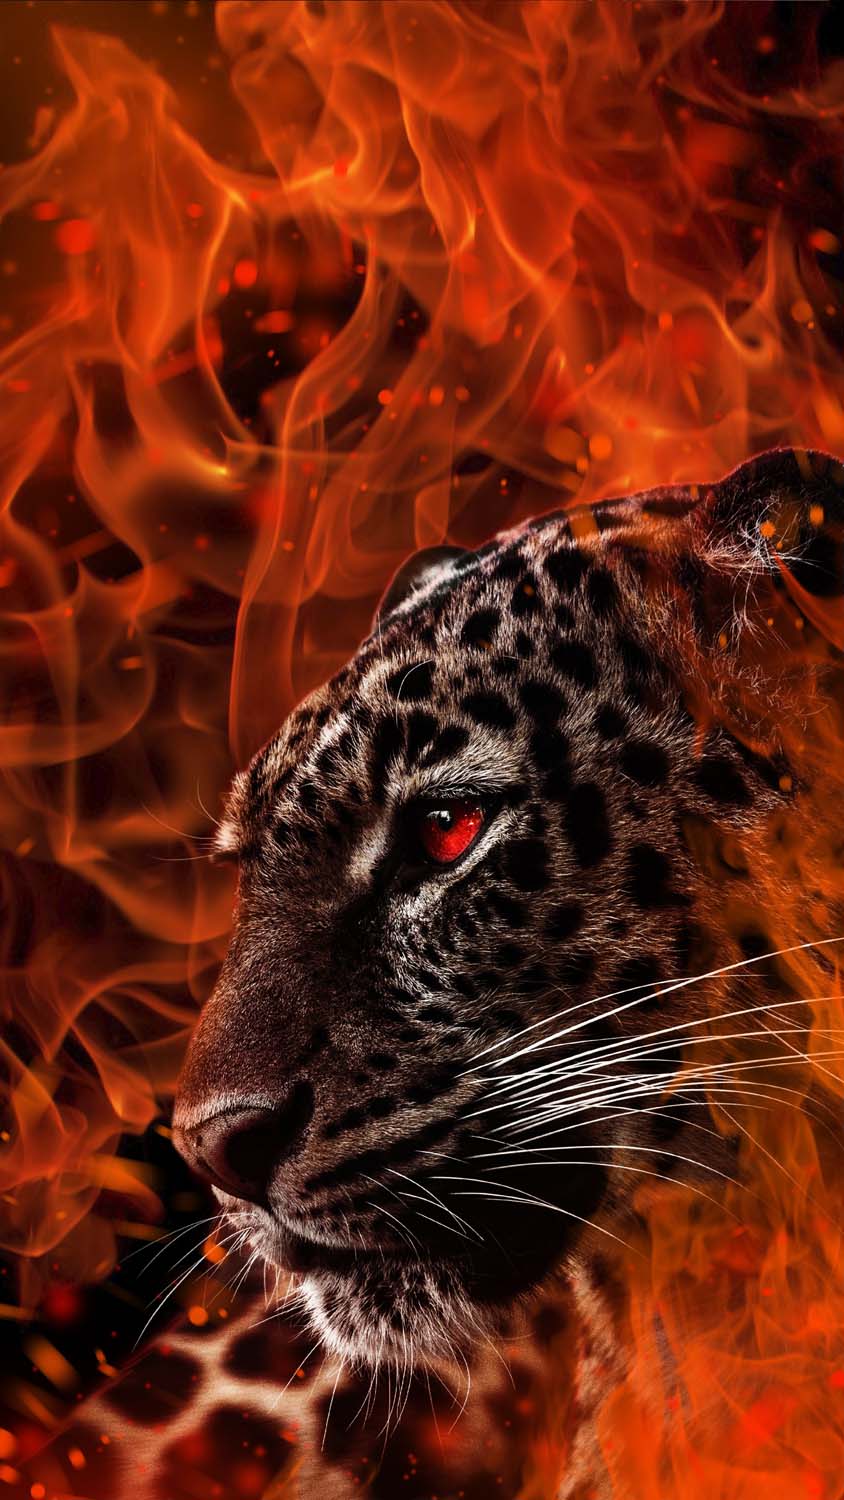 Leopard Fire IPhone Wallpaper HD - IPhone Wallpapers : iPhone Wallpapers